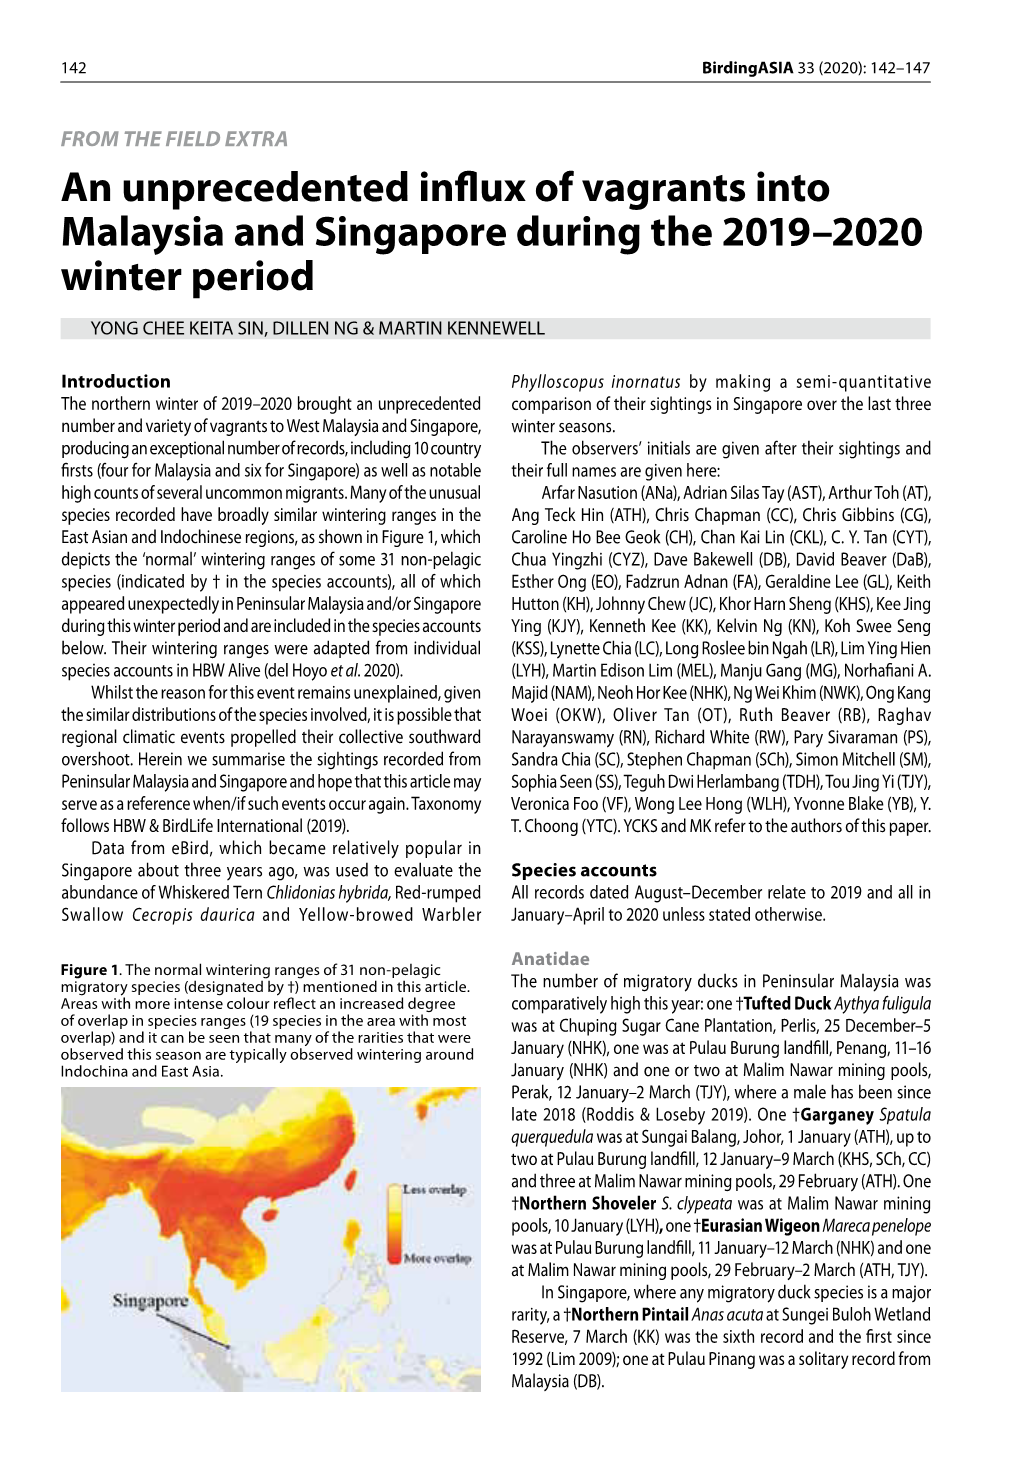 An Unprecedented Influx of Vagrants Into Malaysia and Singapore During the 2019–2020 Winter Period